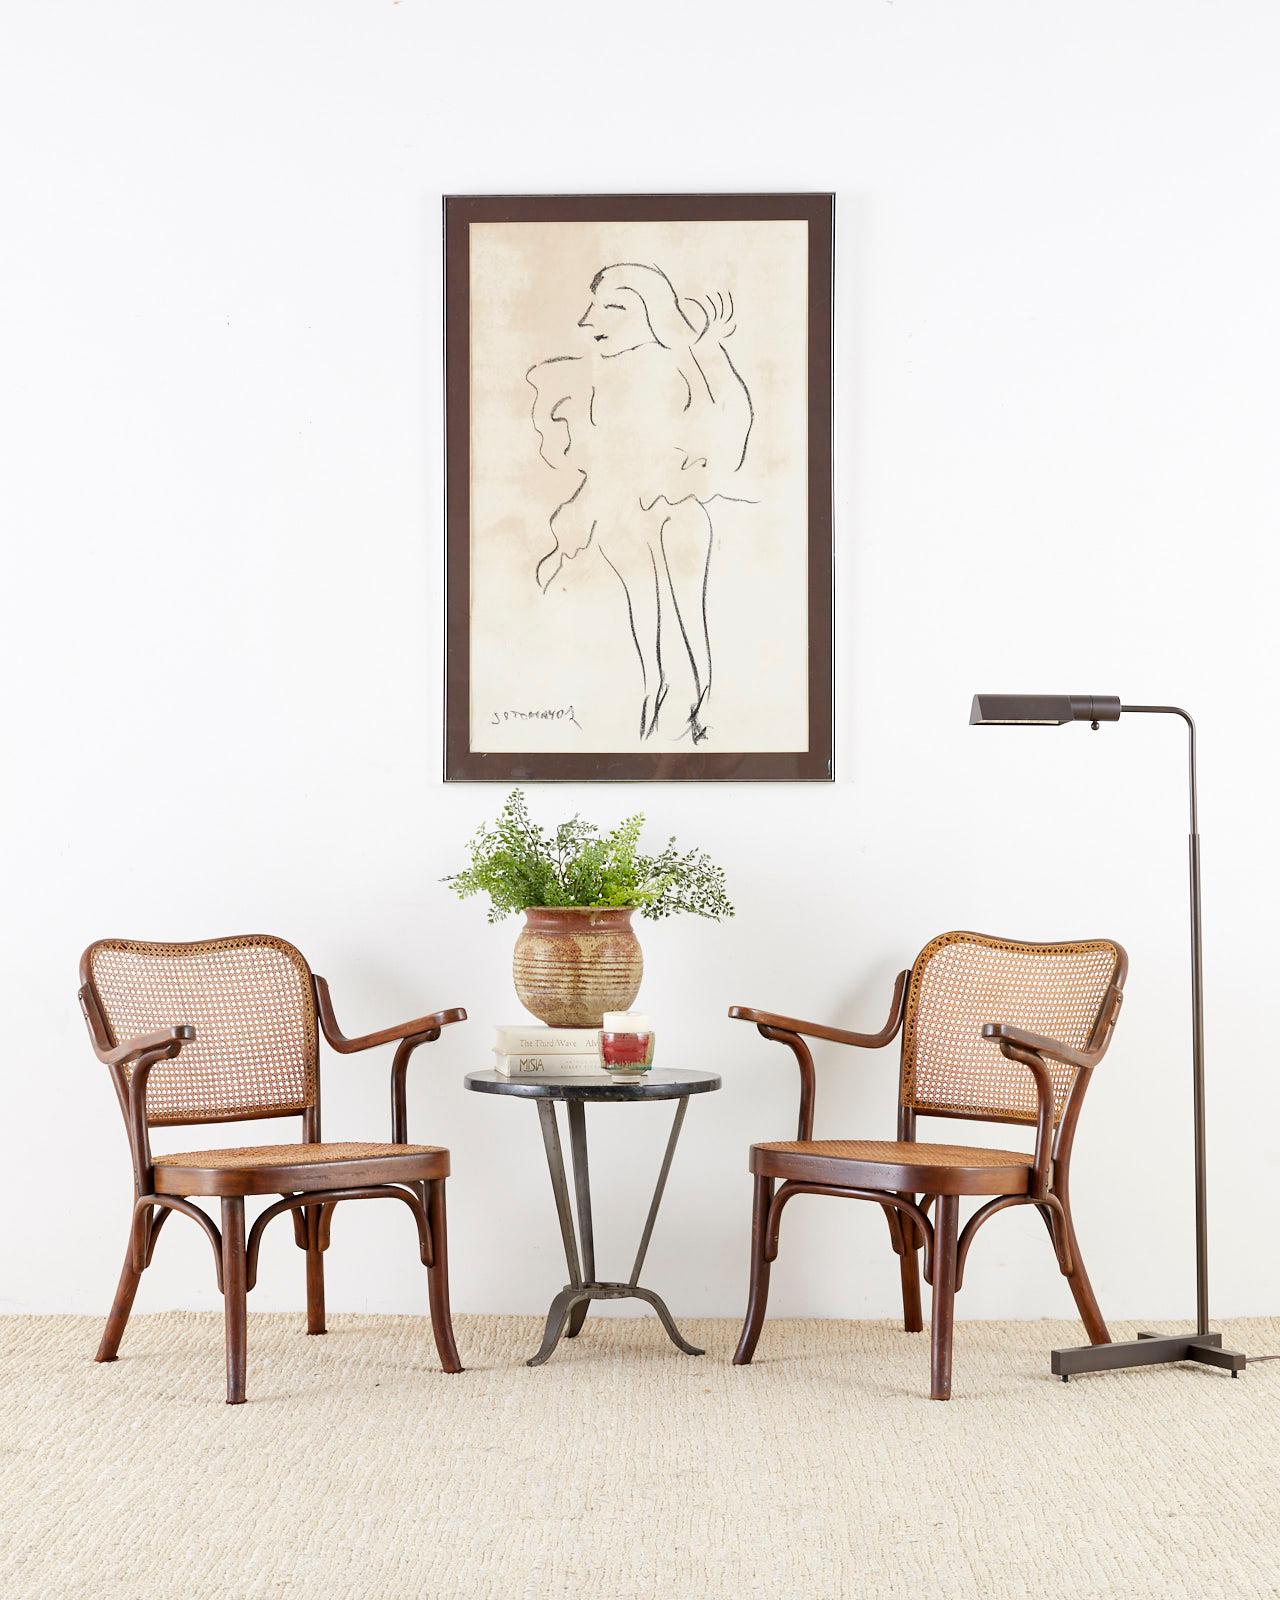 Modern style bronze adjustable height pharmacy floor lamp by Casella Lighting. Features a rare matte bronze finish and a T shaped base. Adjusts from 37 to 46 inches high with a shade that rotates 360 degrees. The lamp has a dimmer switch and is made